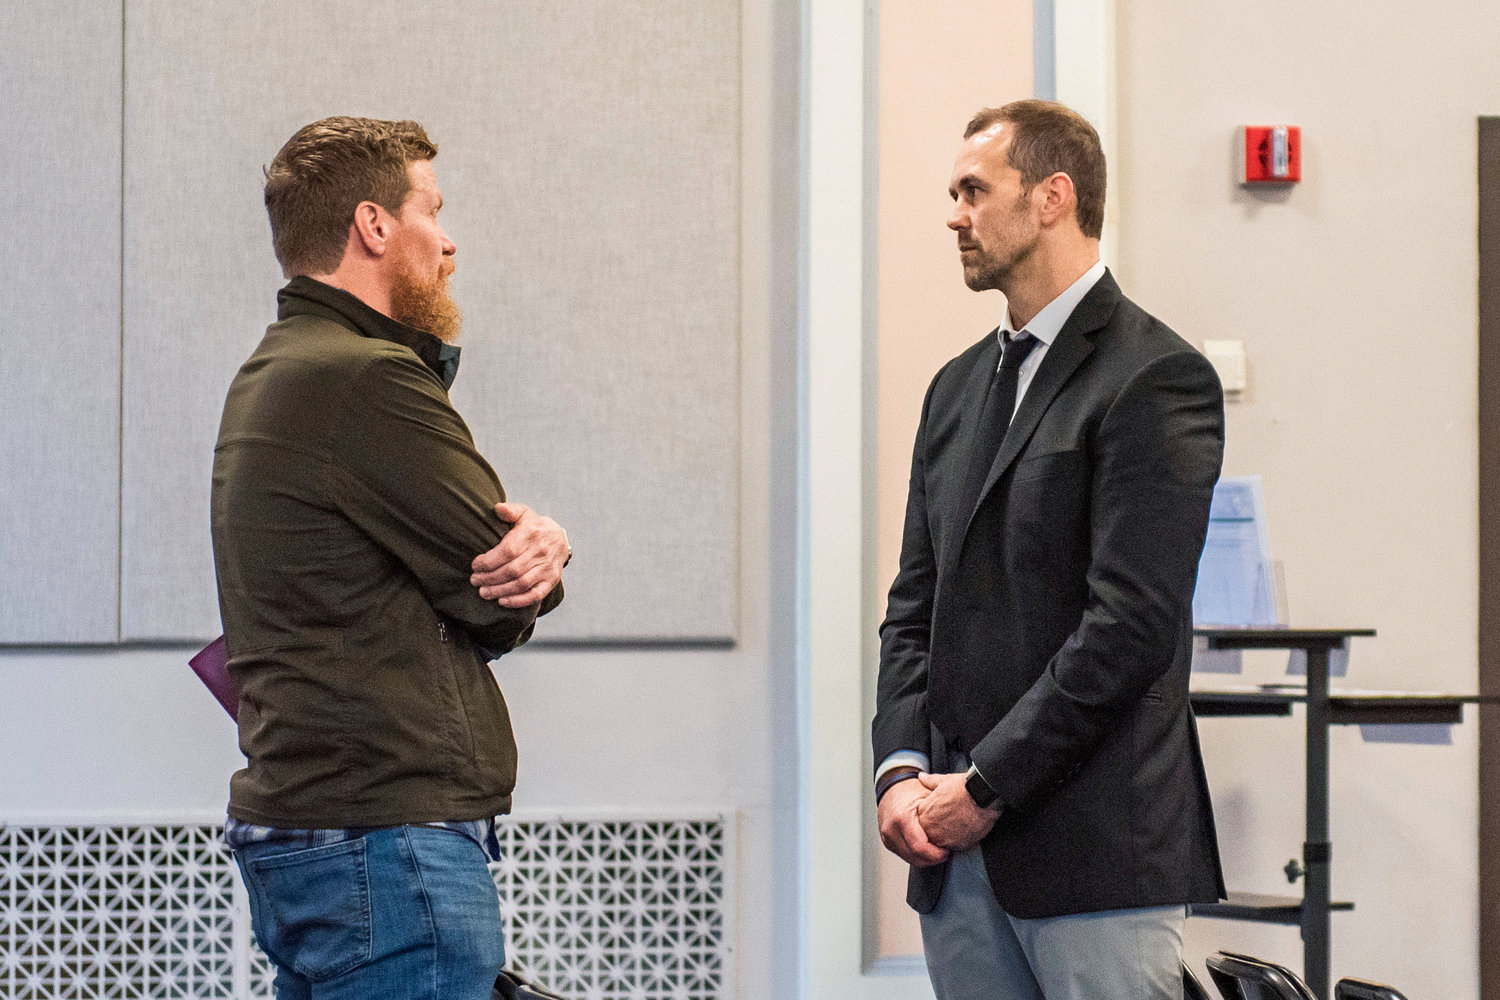 Commissioner Sean Swope approaches Cole Meckle, pastor at Gather Church in Centralia — which has run the county’s coordinated entry program among other services for homelessness — ahead of Tuesday morning meetings in the Lewis County Commissioners’ Hearing room in Chehalis.